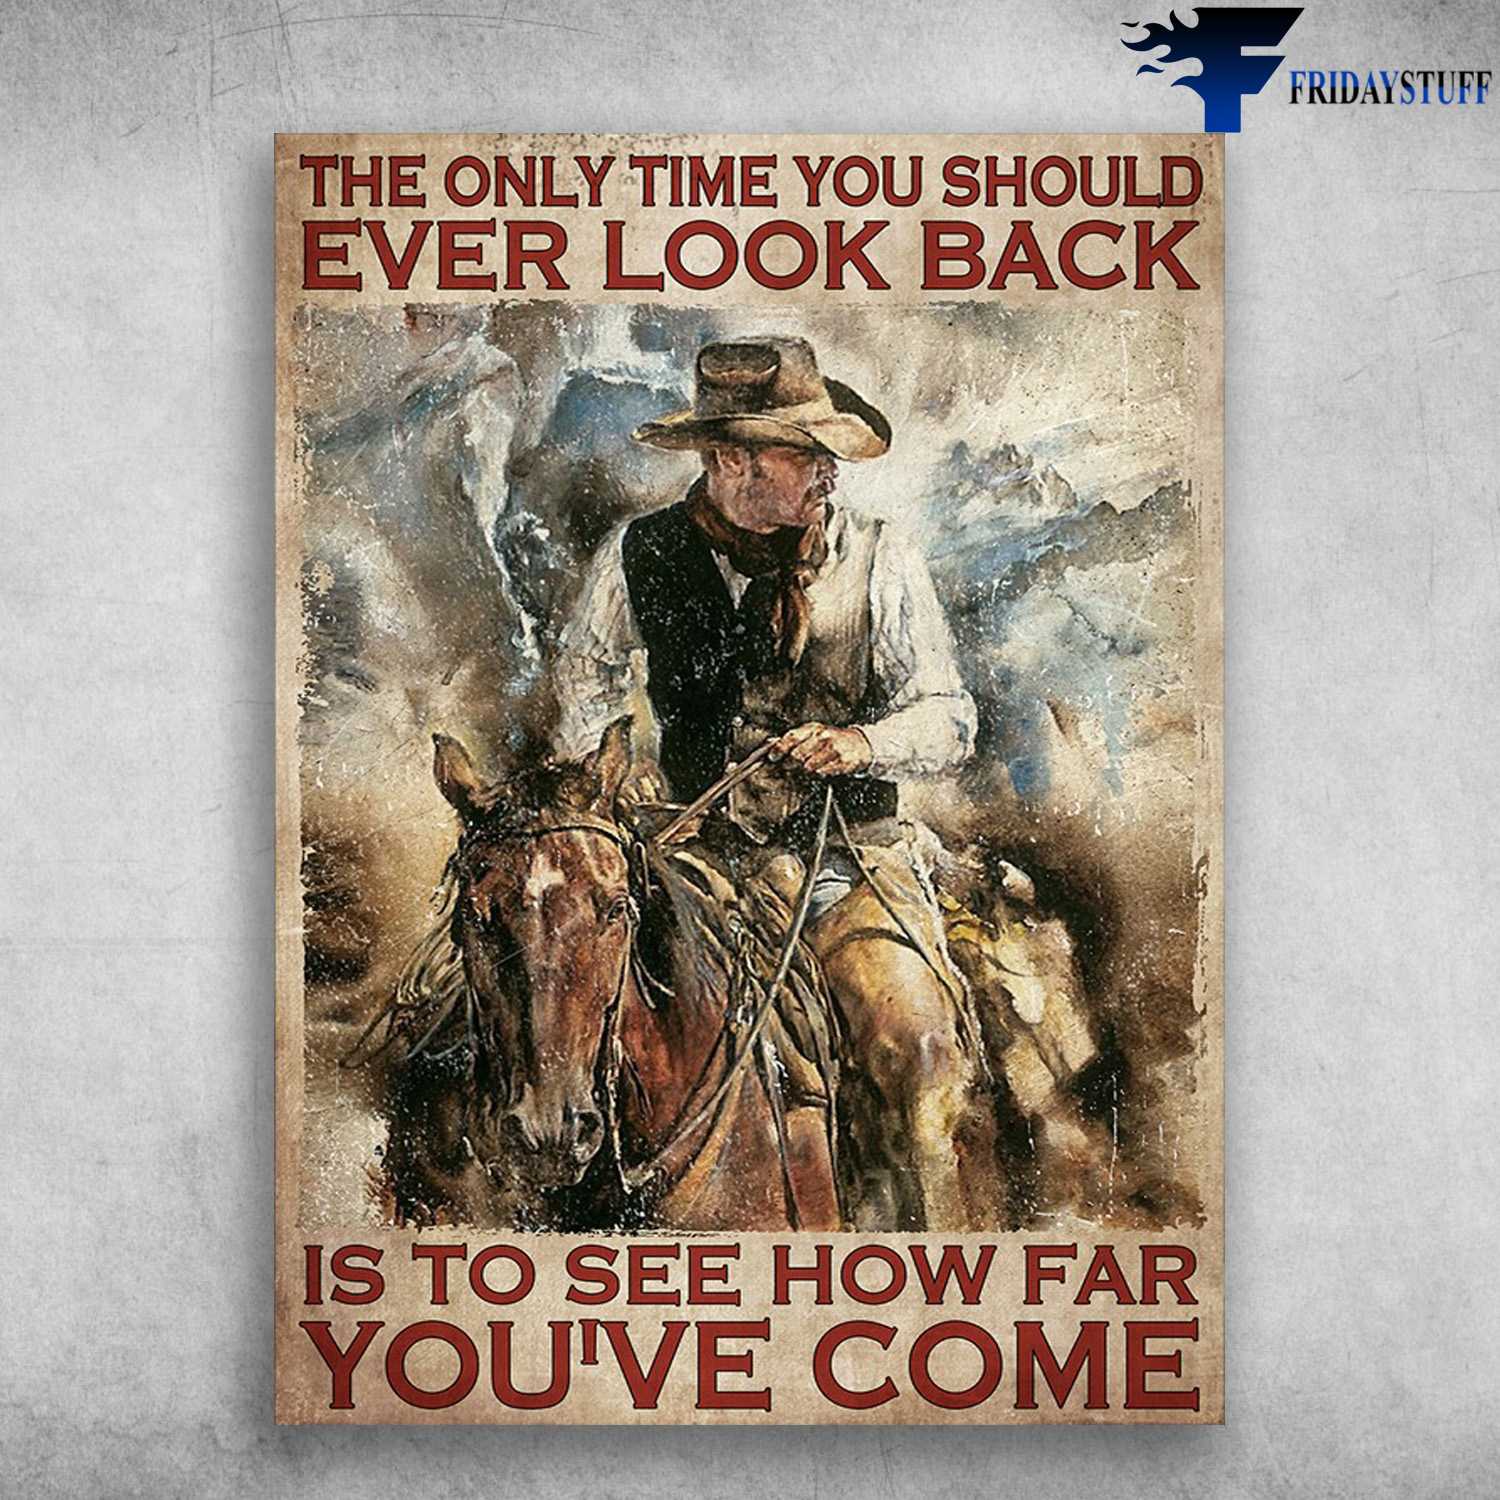 Cowboy And Horse, Horse Riding - The Only Time You Should Ever Look Back, Is To See How Far You've Come